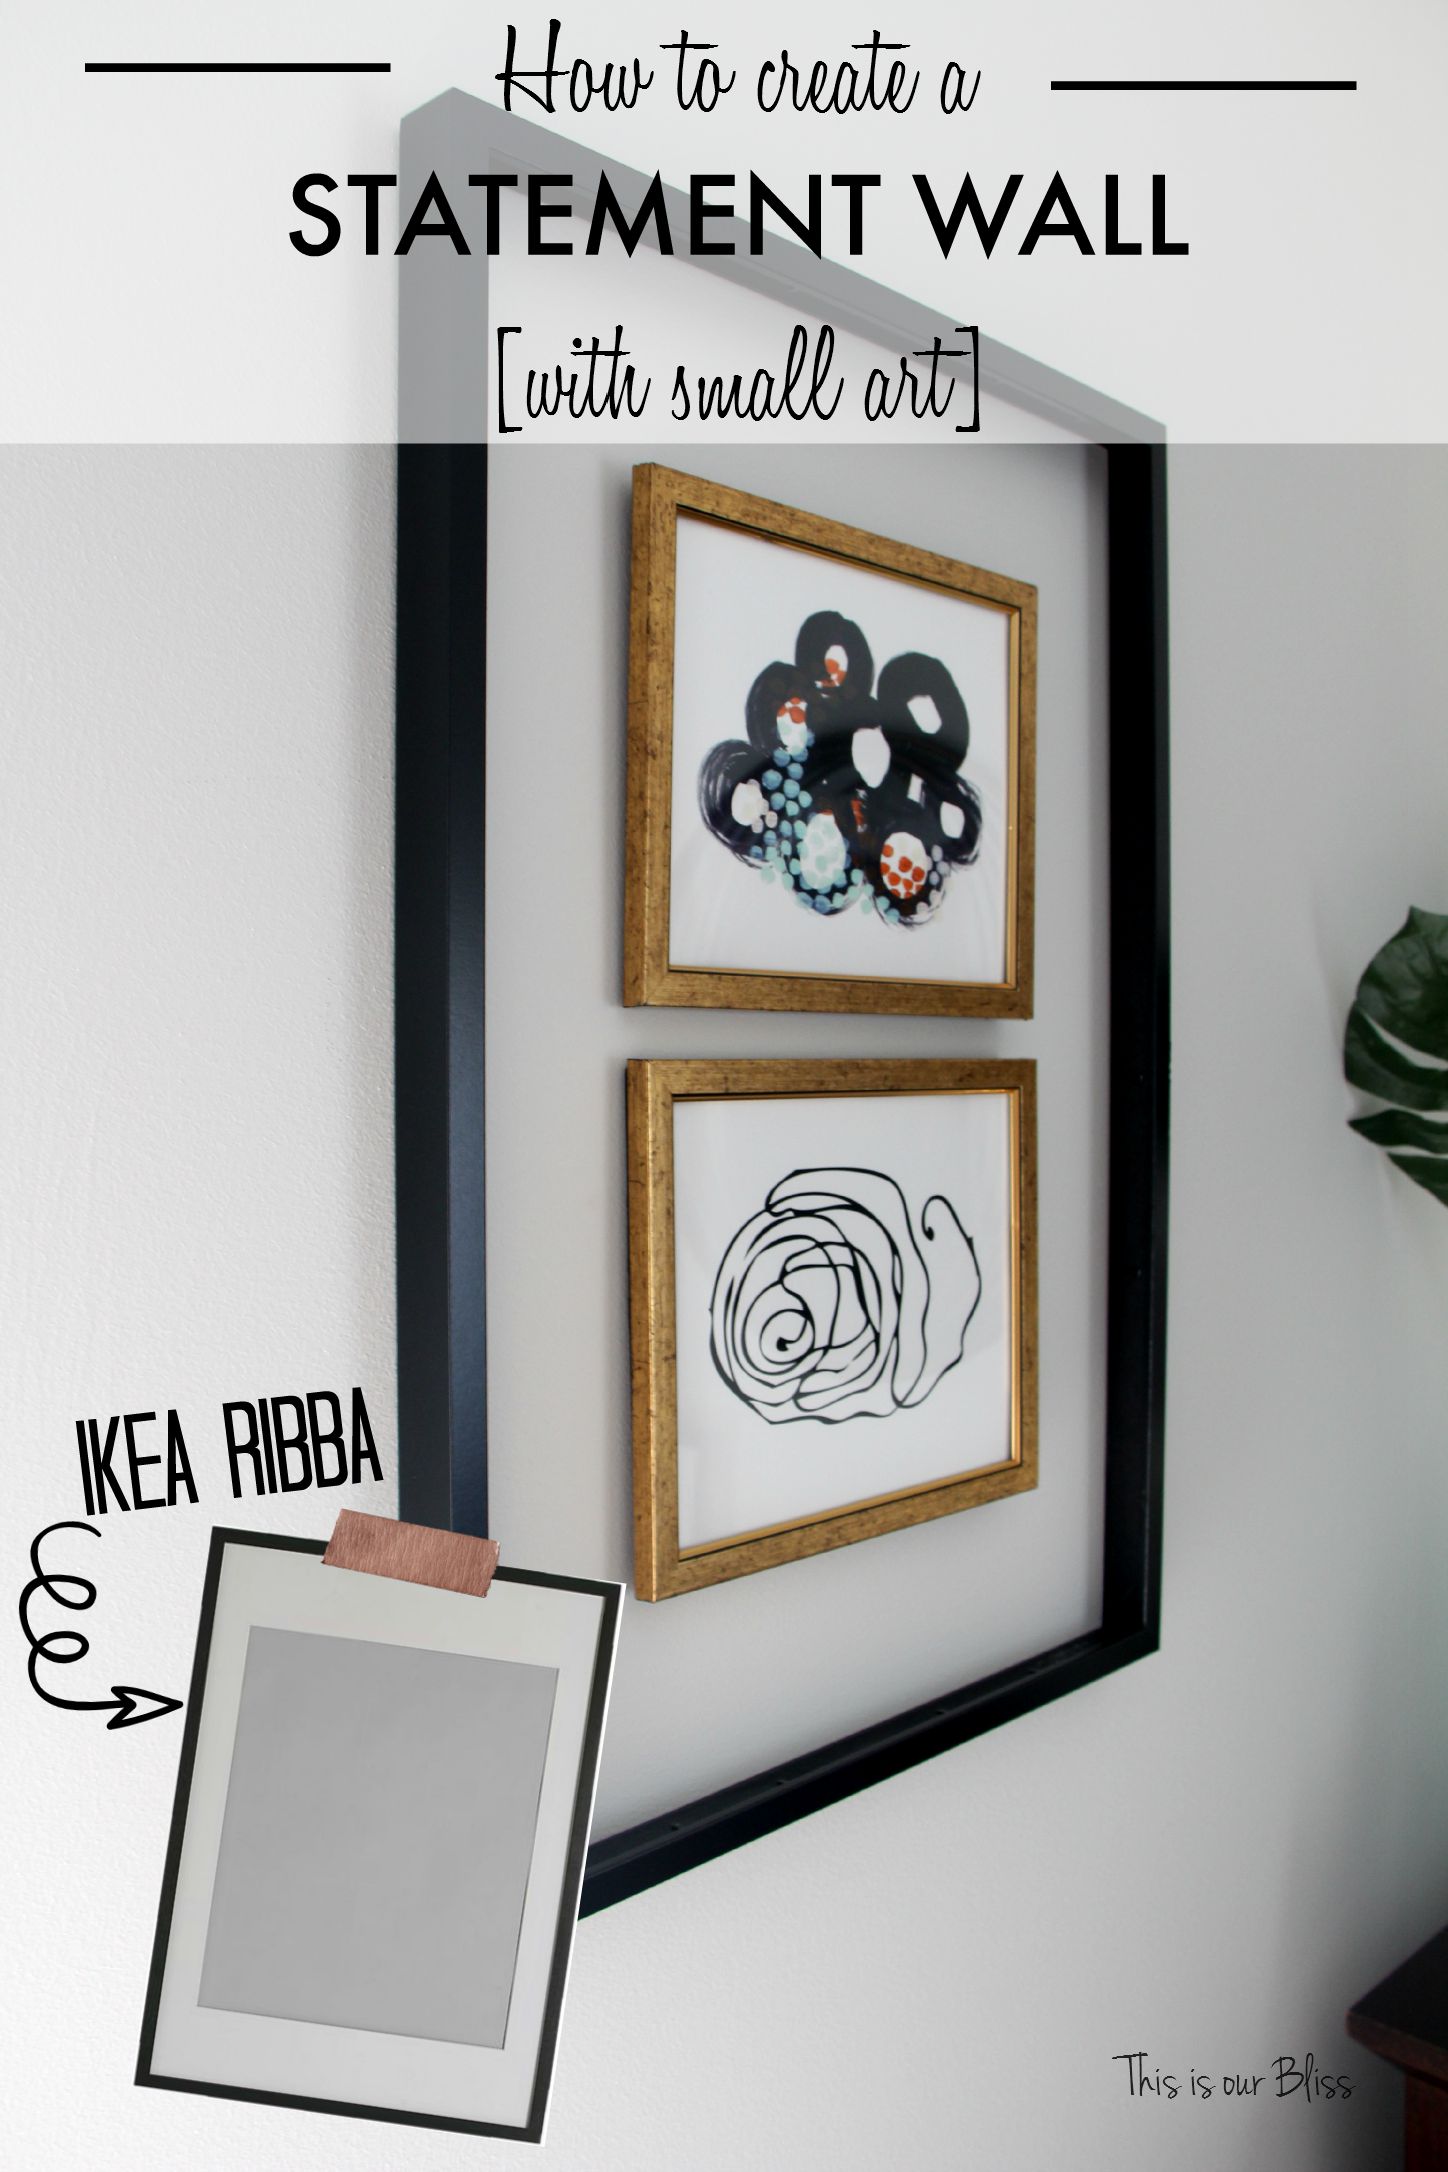 How to create a statement wall with small art - Framing a frame - gallery wall - how to - diy open frame - painting a frame - This is our Bliss